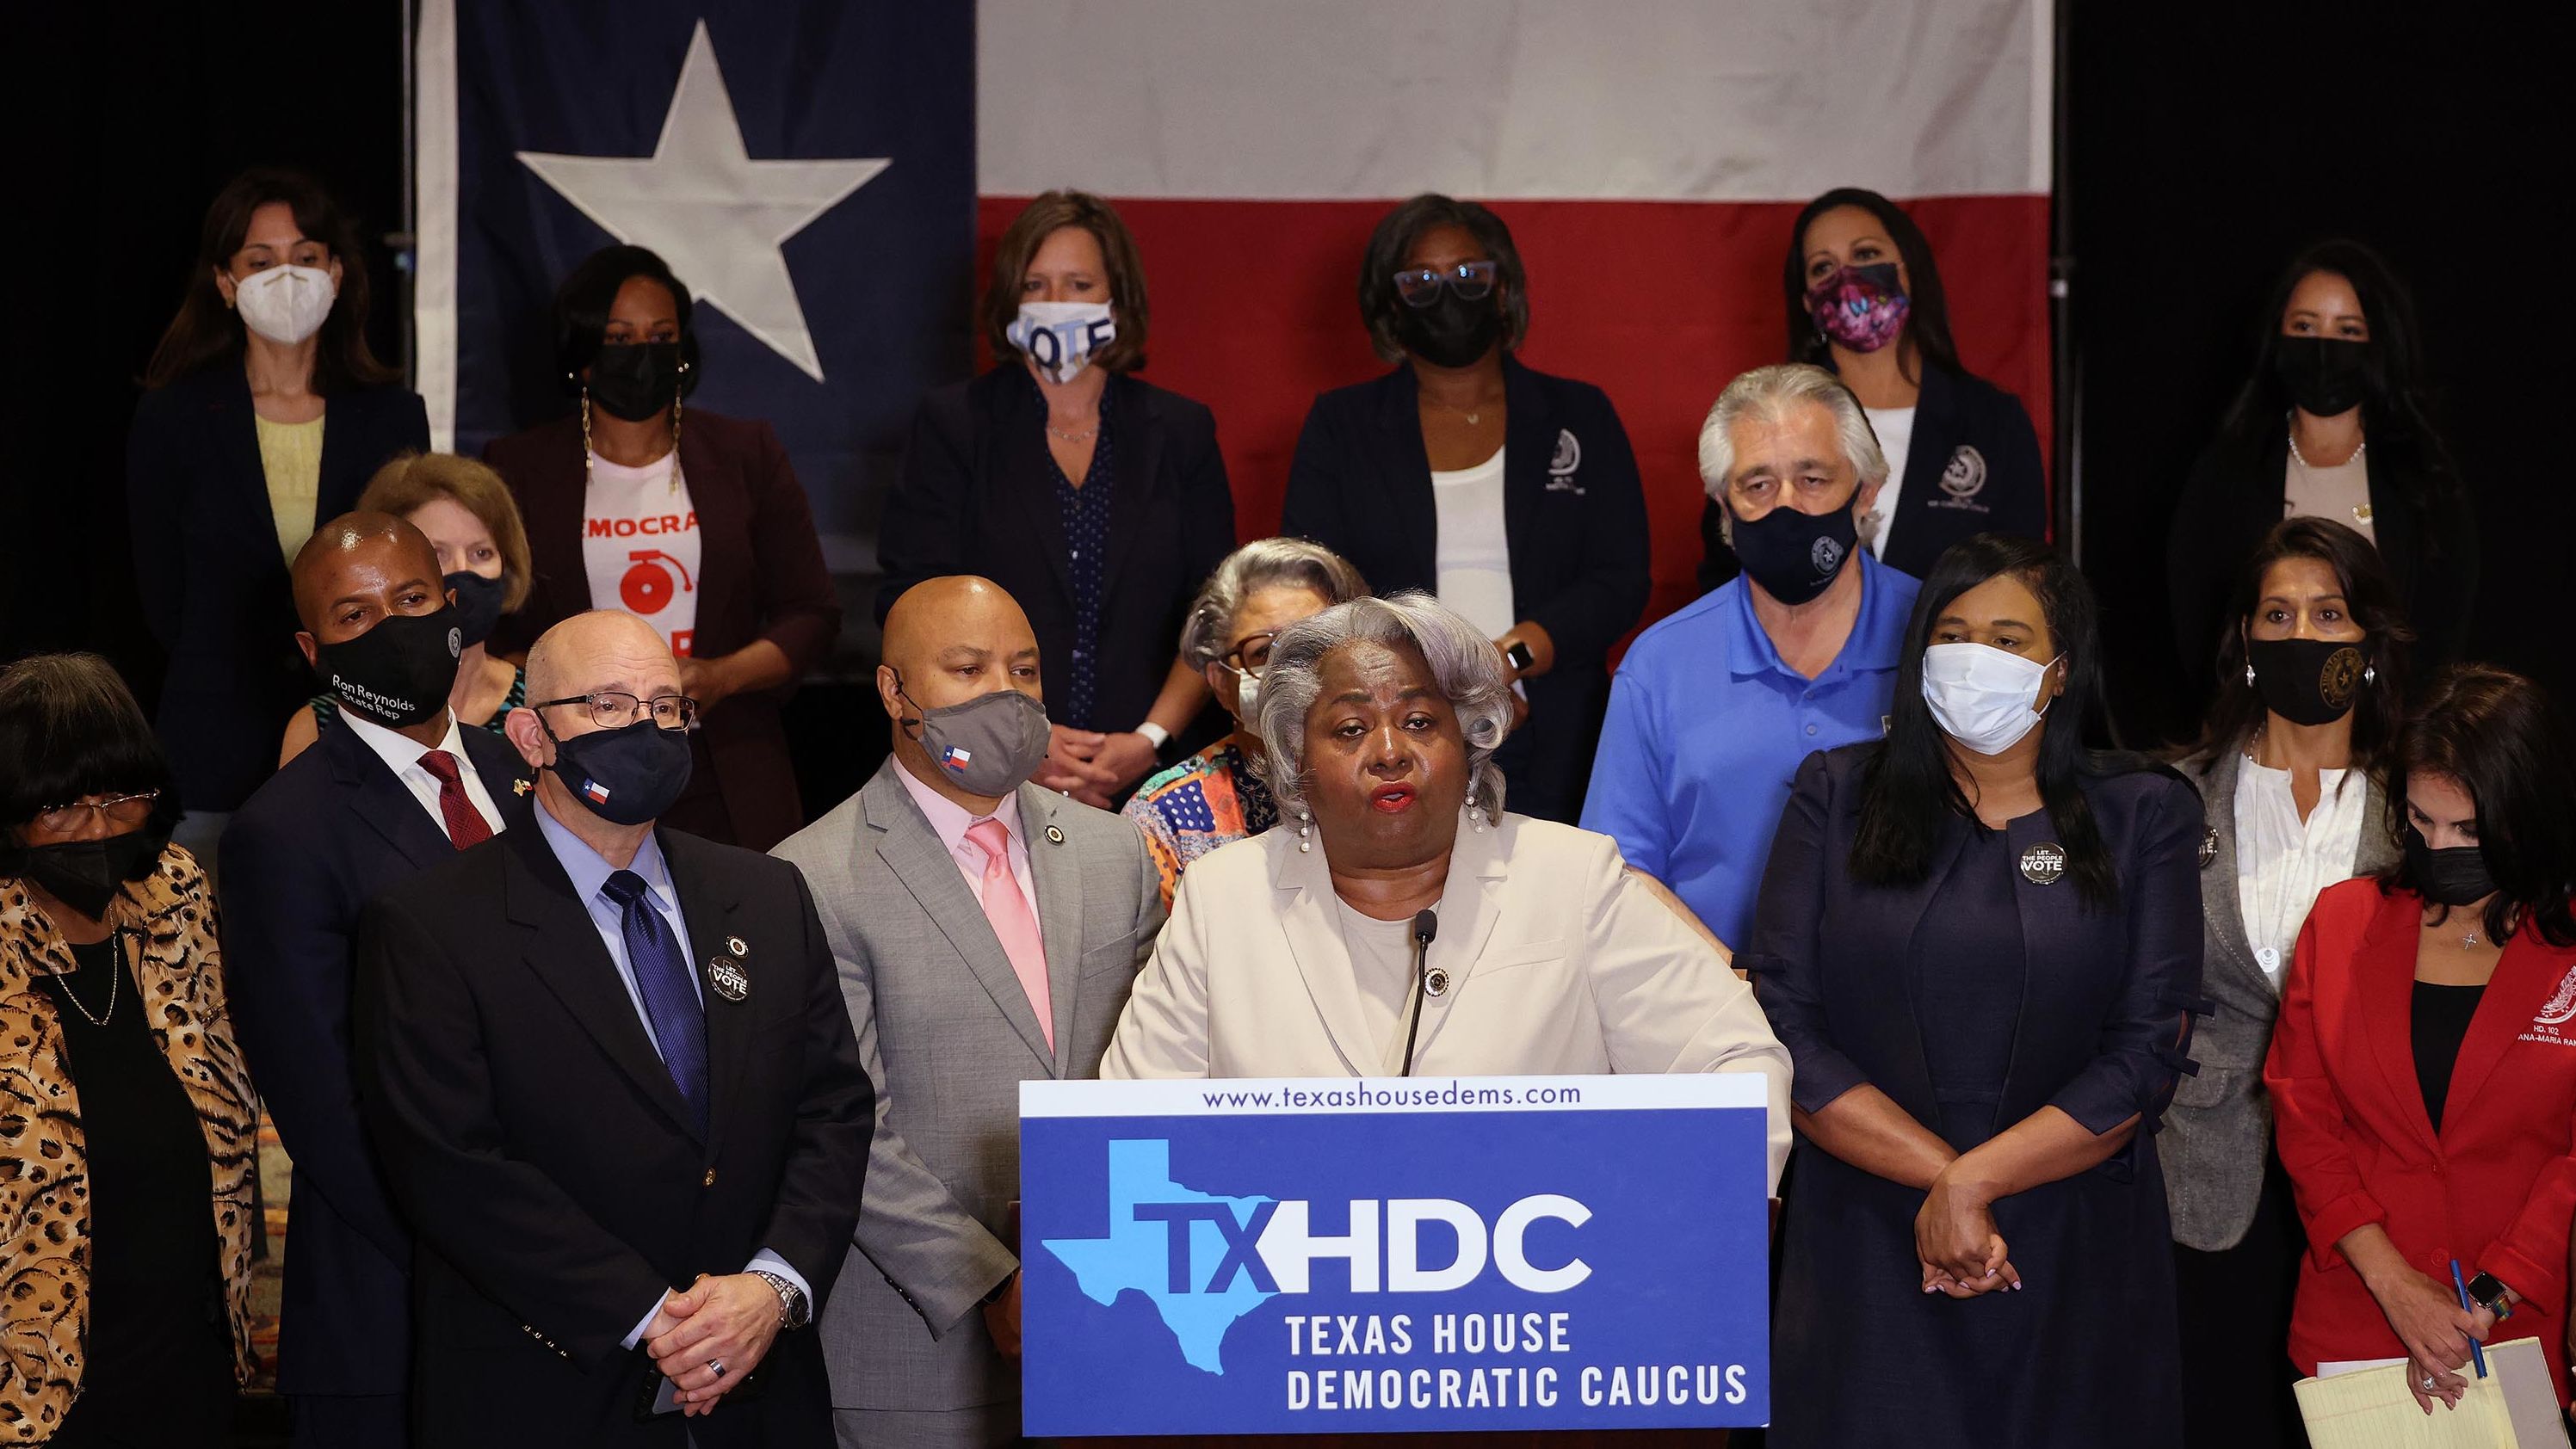 Texas State Rep. Barbara Gervin-Hawkins, joined by fellow Democratic Texas state representatives, speaks at a press conference on Texas Gov. Greg Abbott and the group's meetings with federal lawmakers on voting rights on July 20, 2021 in Washington, DC.